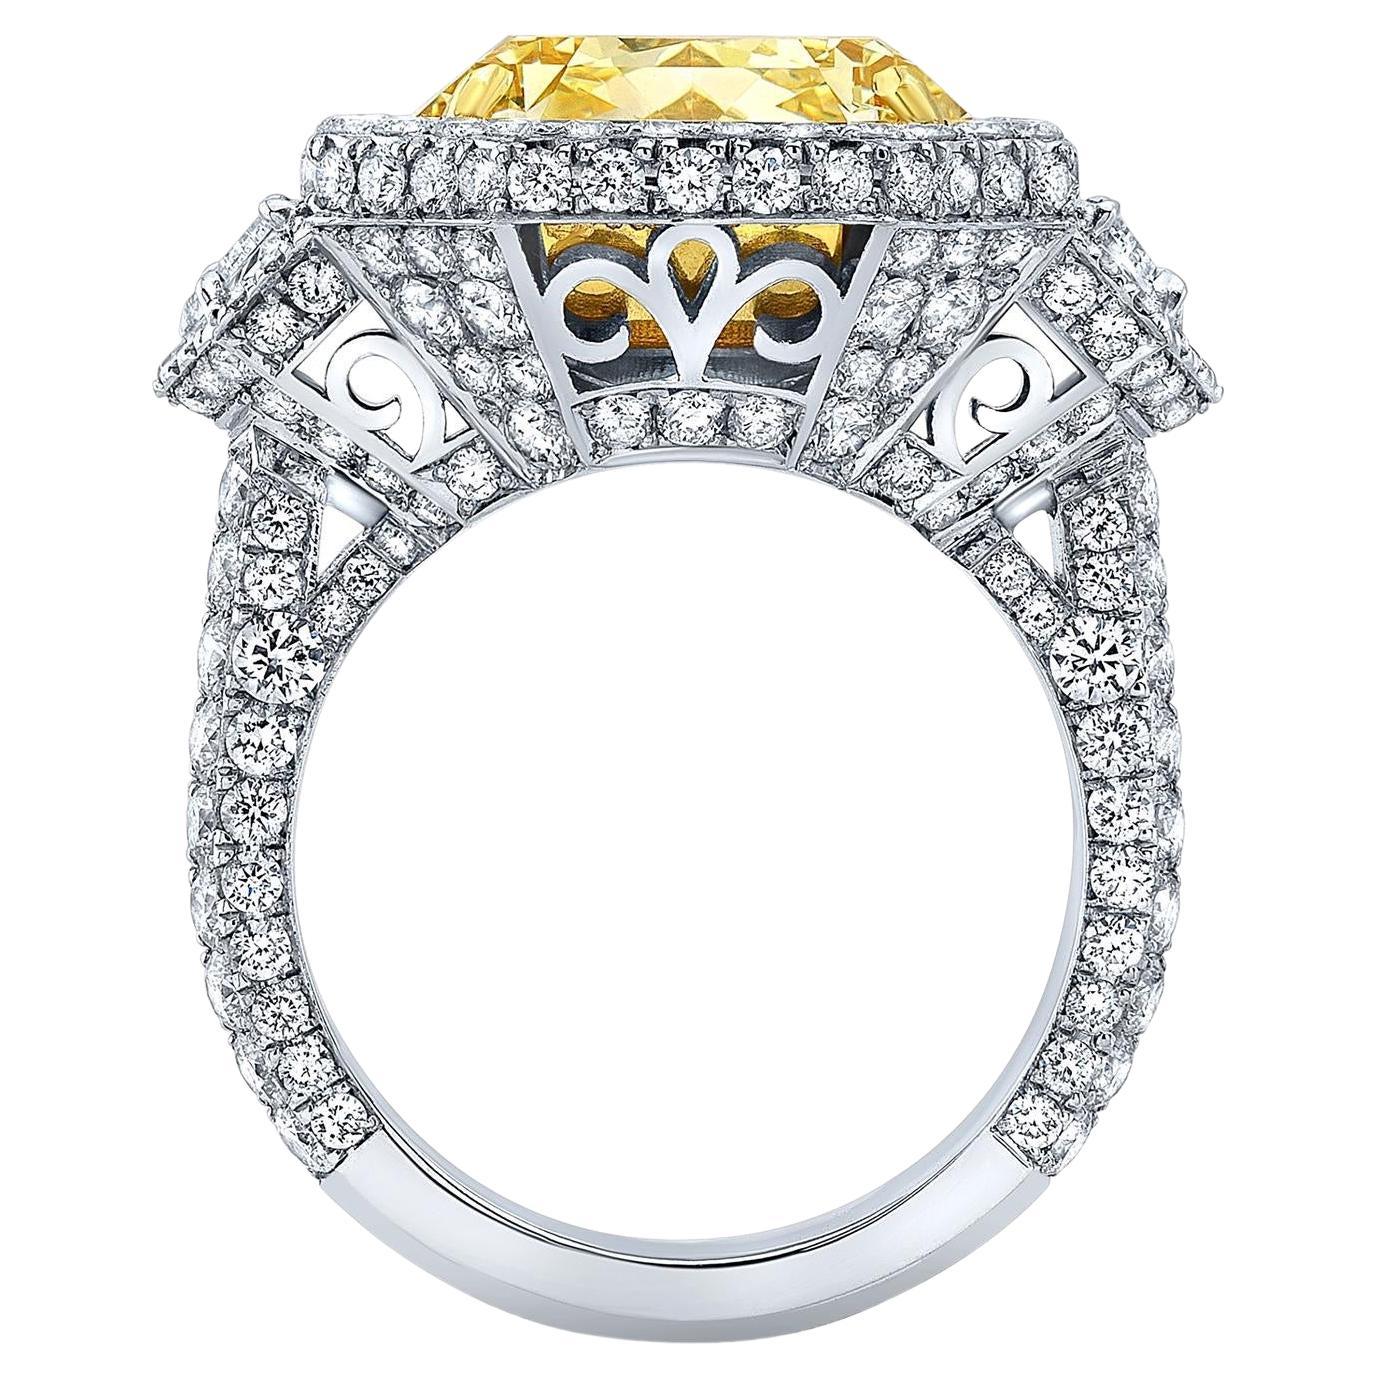 Magnificent 10.43 carat radiant cut Fancy Light Yellow Diamond, SI2 clarity, flanked by a pair of 0.61 carat trapezoid diamonds, and a total of 3.38 carat round brilliant diamonds, are comprising this 18K white and yellow gold ring.
The GIA